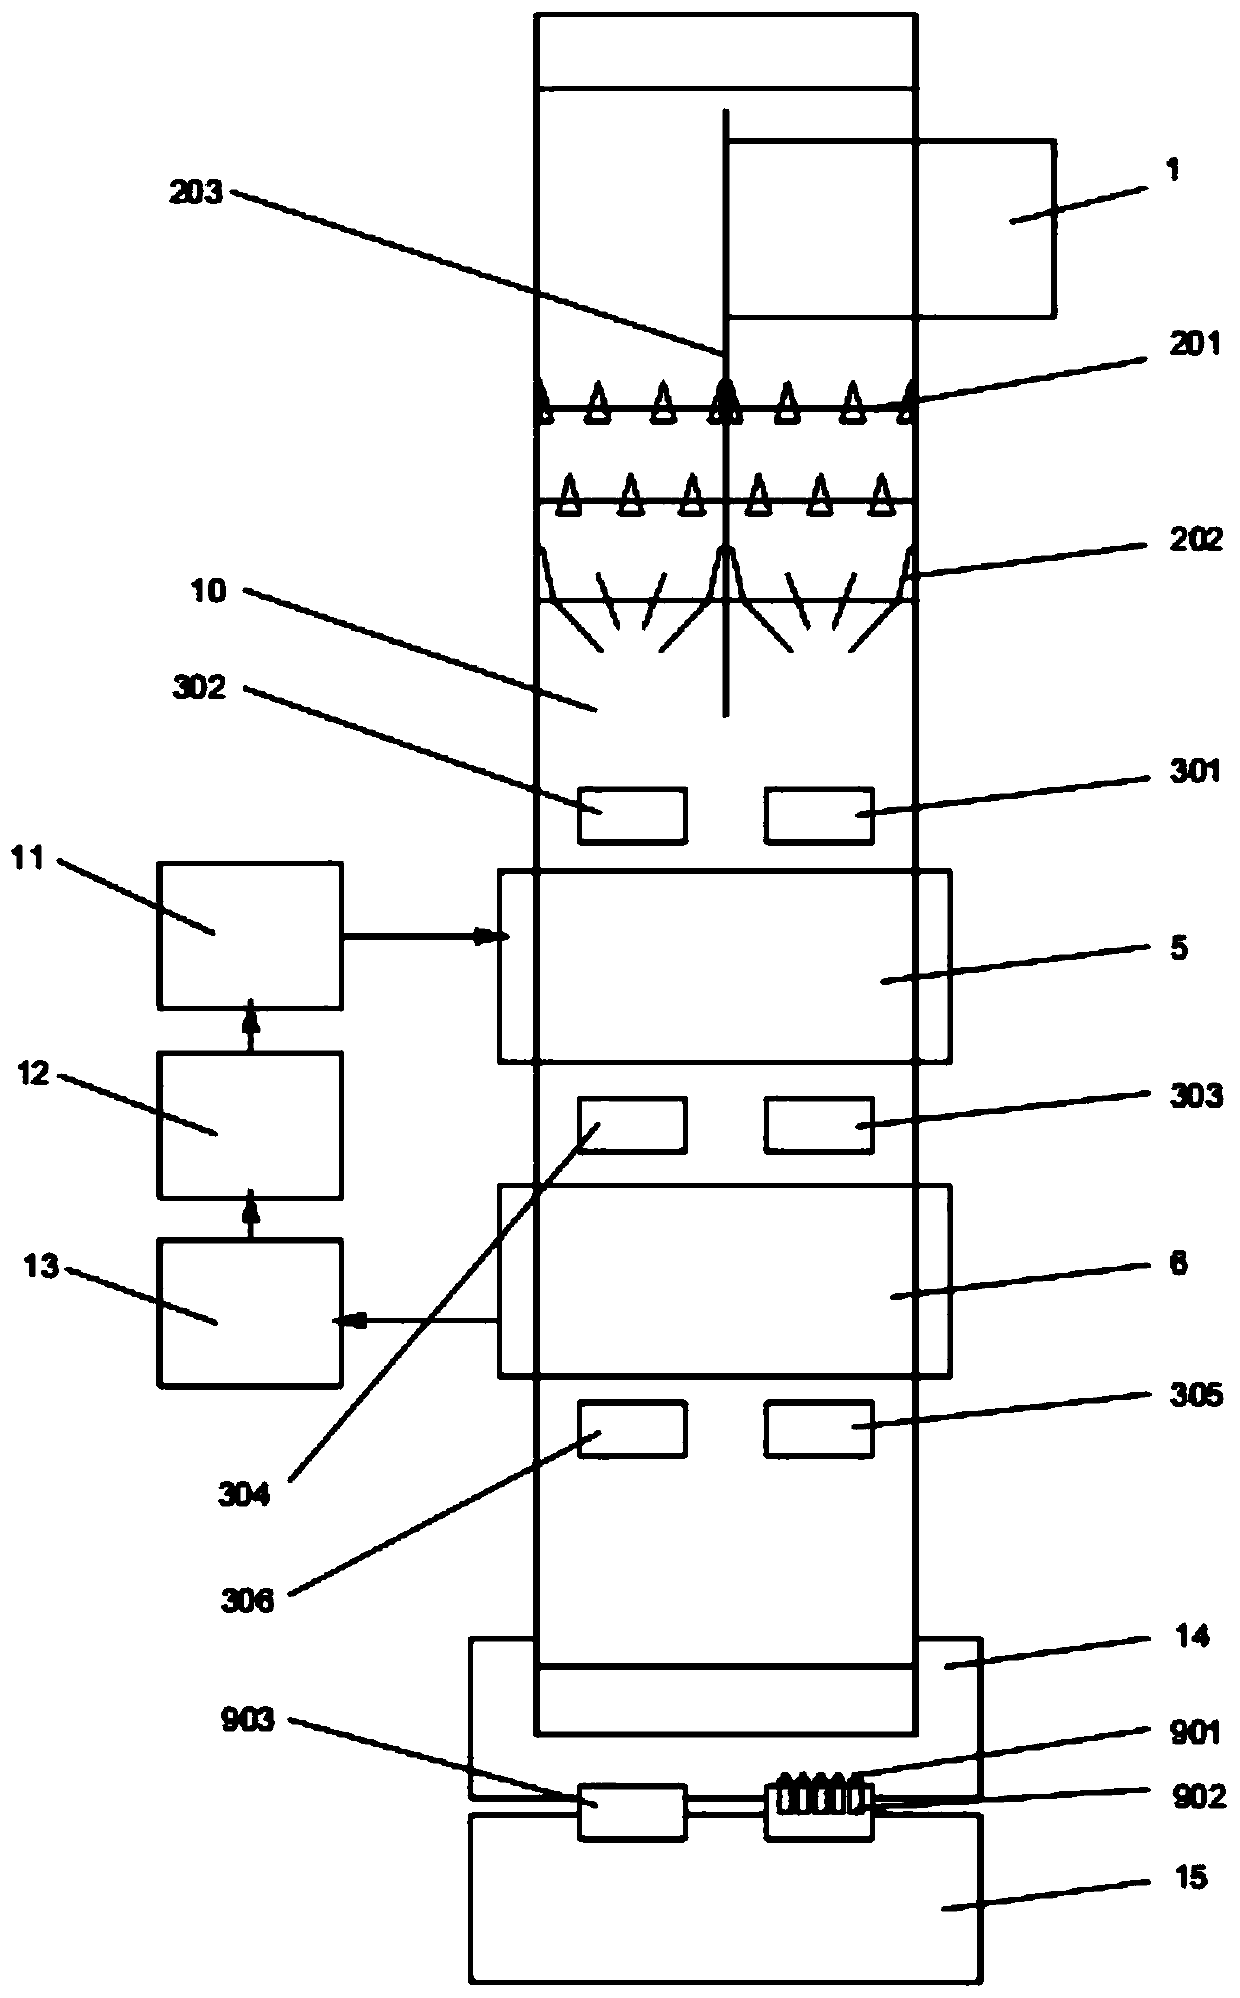 Automatic coal and gangue separation system and method based on temperature changes